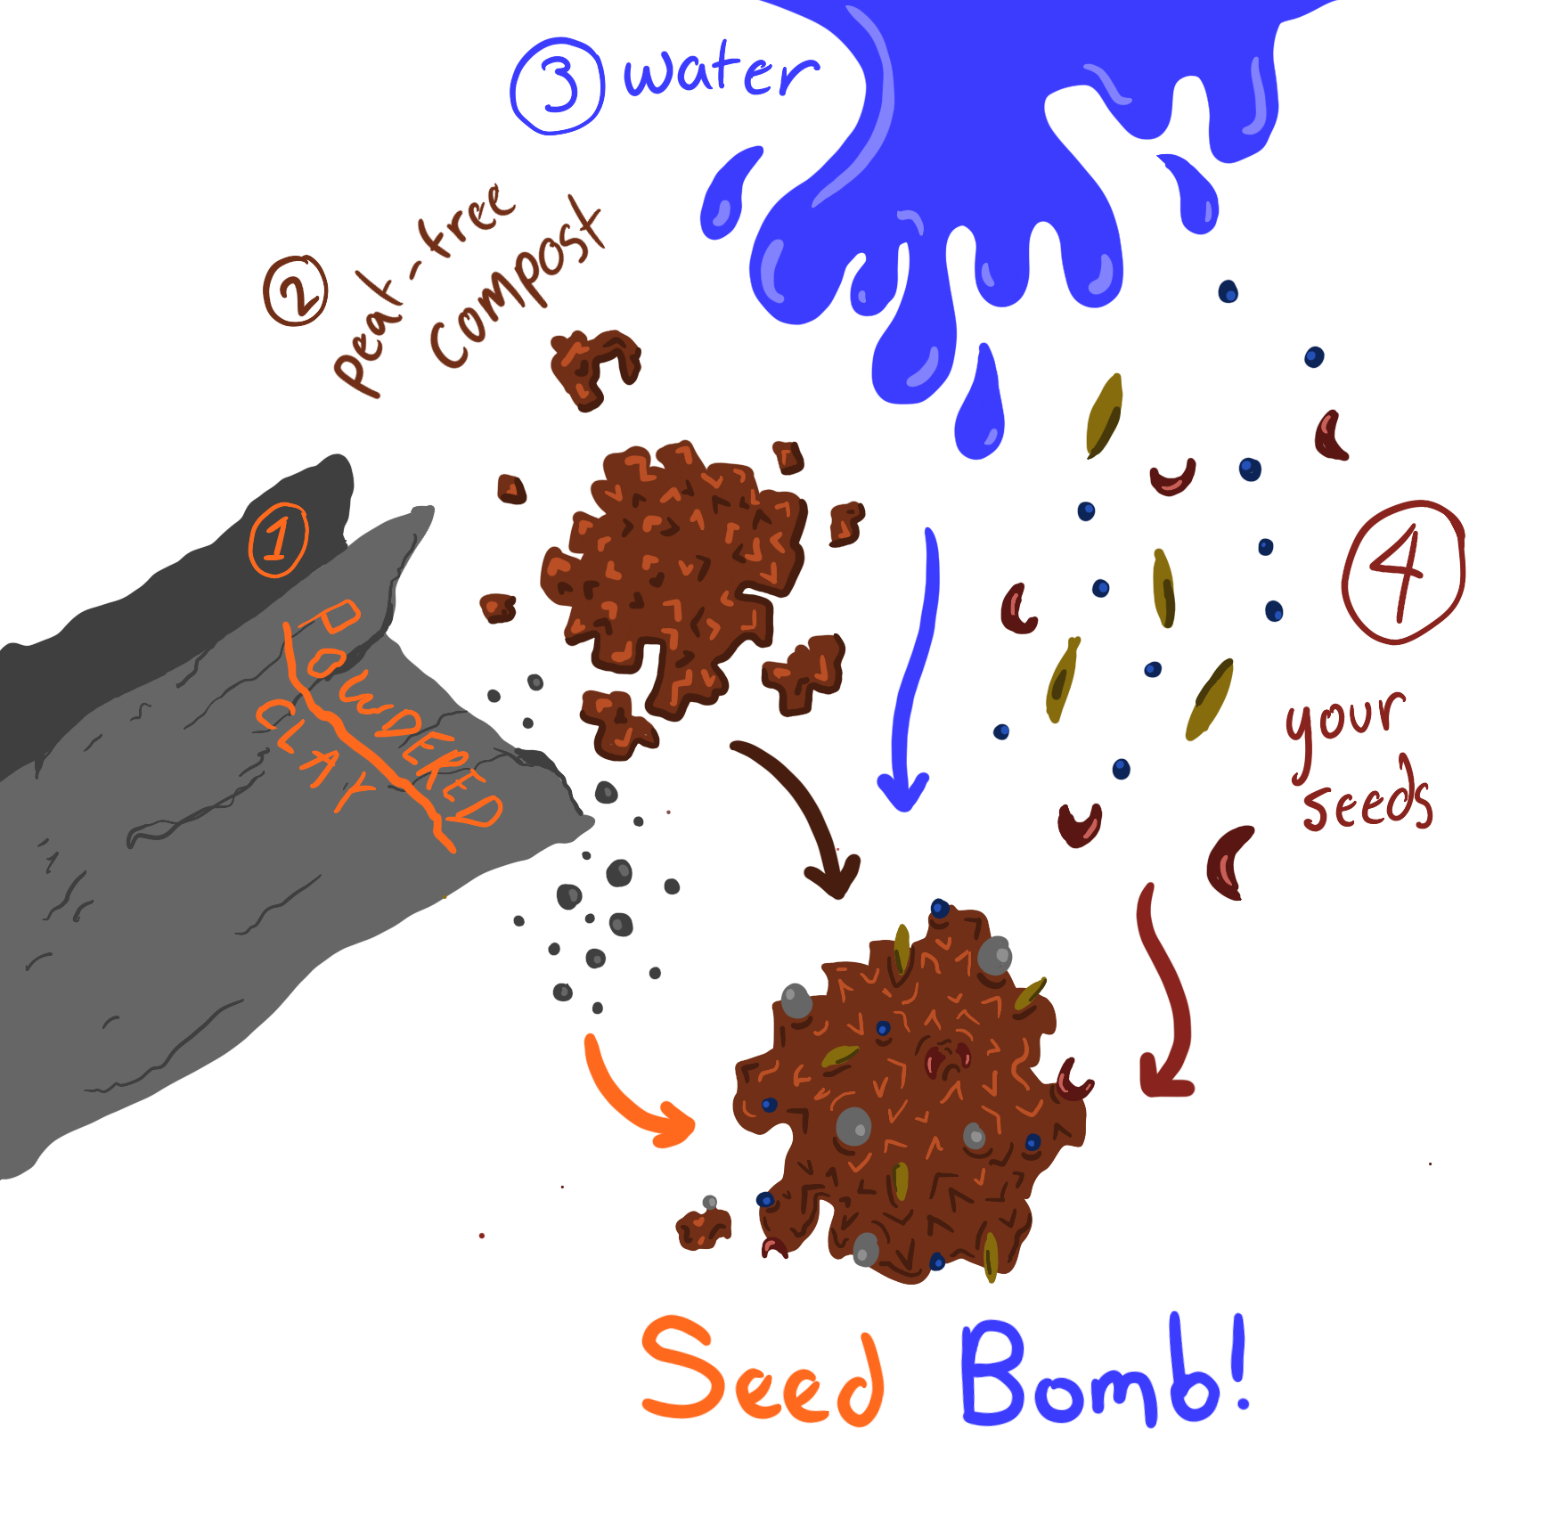 Seed bomb diagram fixed.png